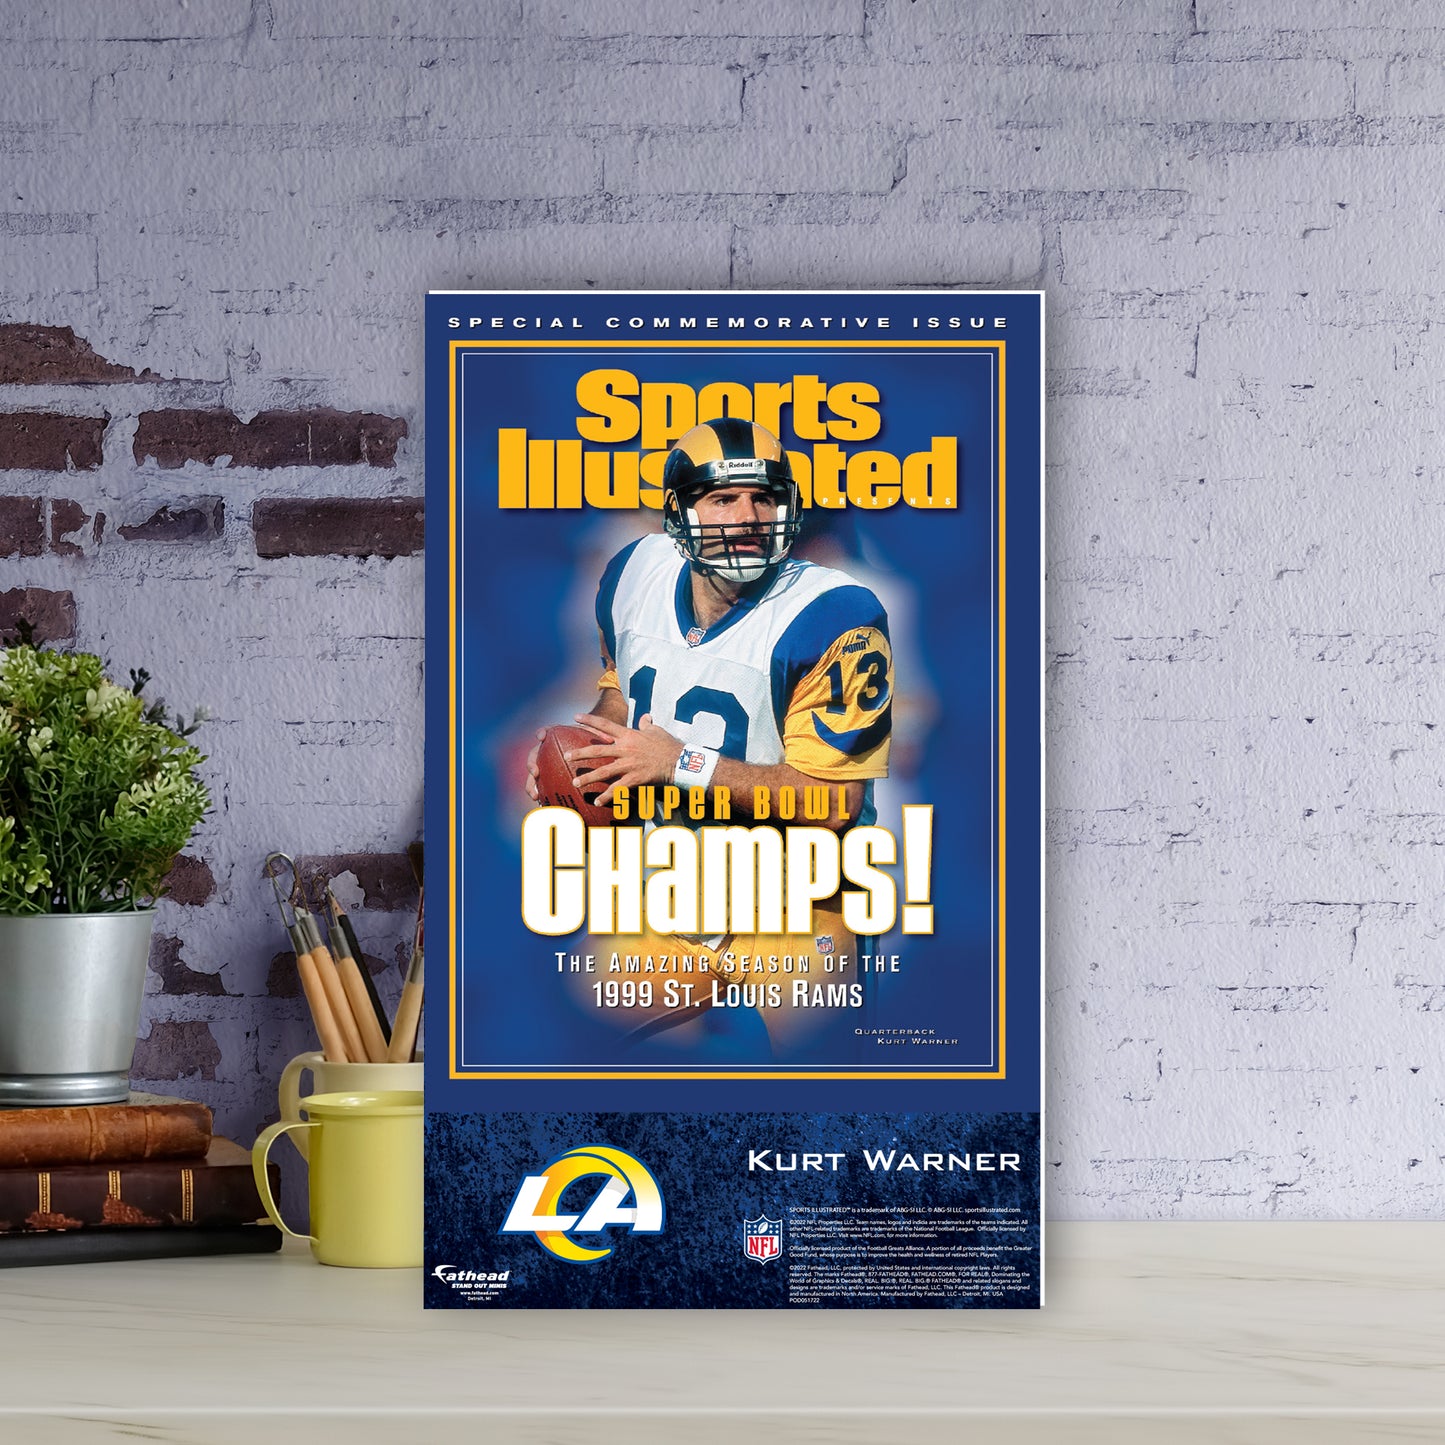 St. Louis Rams: Kurt Warner Februrary 2000 Super Bowl XXXIV Commemorative Sports Illustrated Cover  Mini   Cardstock Cutout  - Officially Licensed NFL    Stand Out